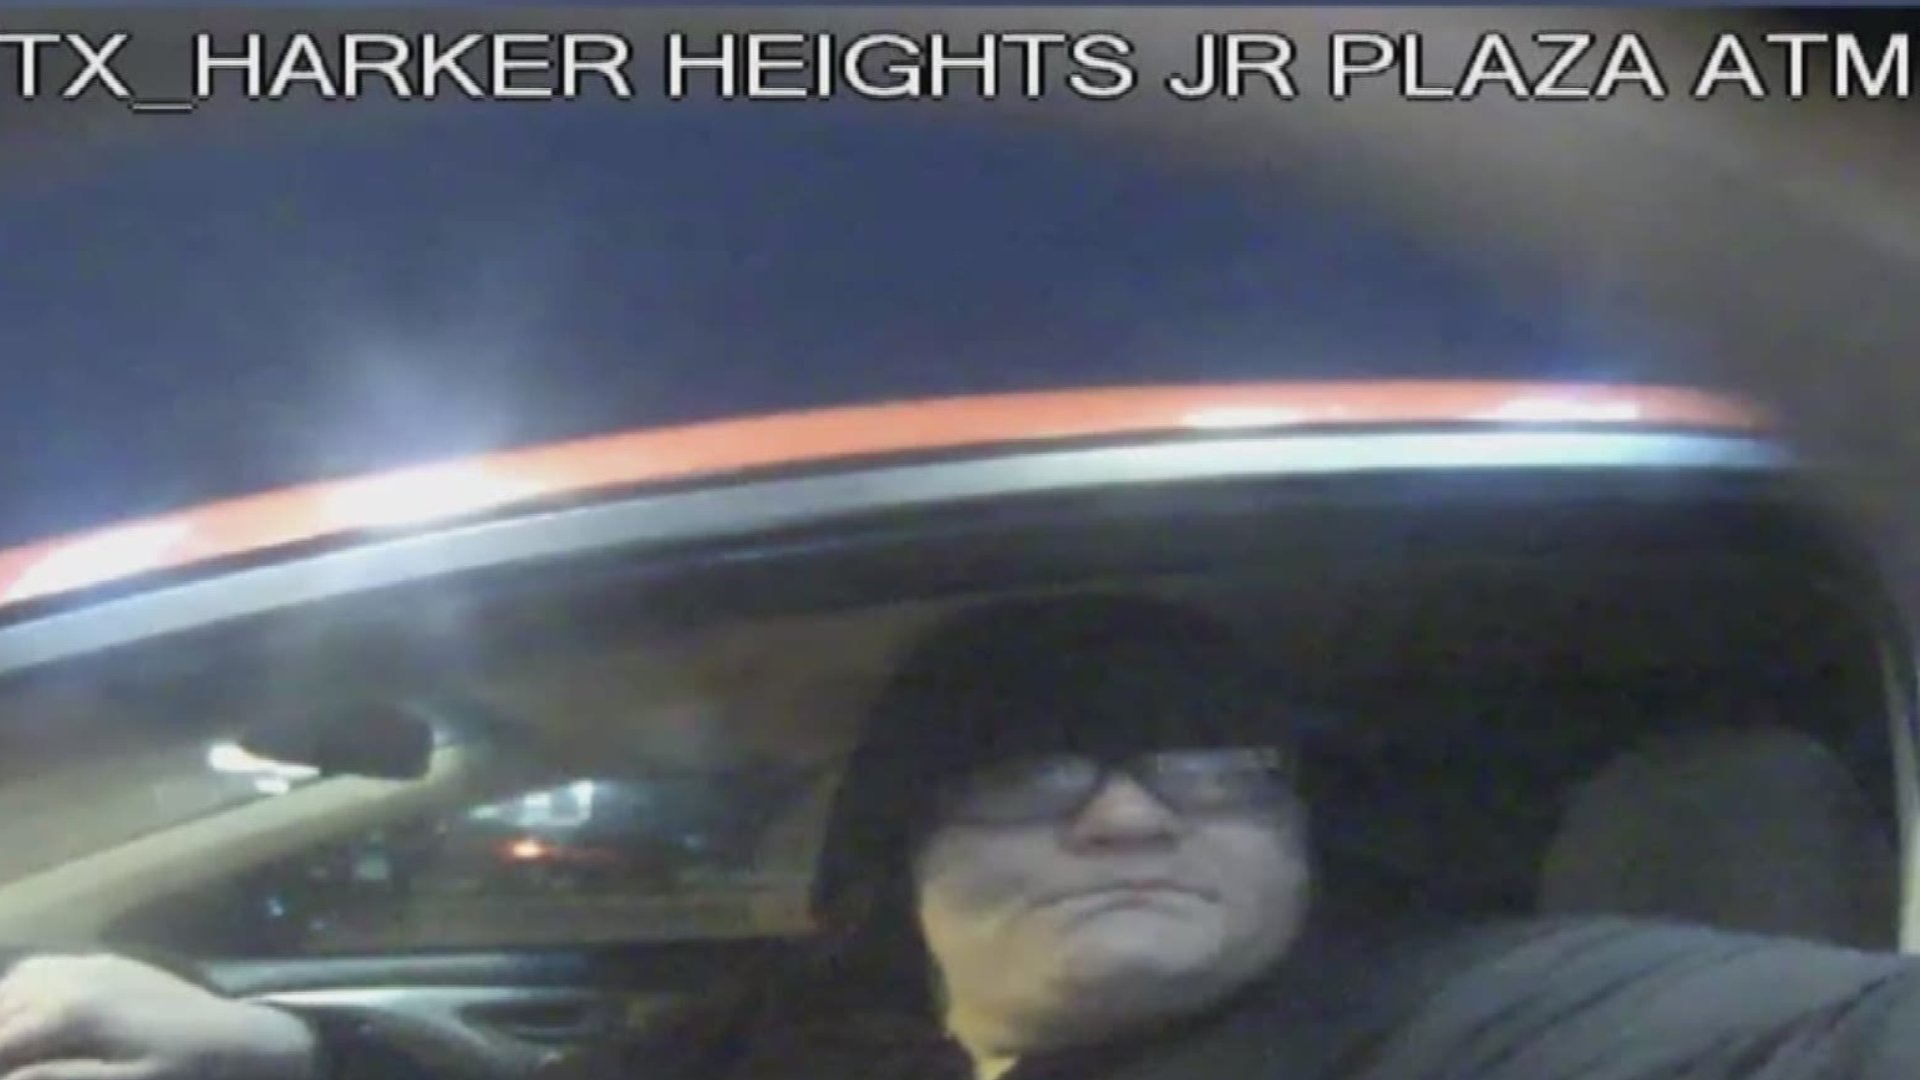 Harker Heights police are searching for someone who passed a stolen check at a USAA ATM.